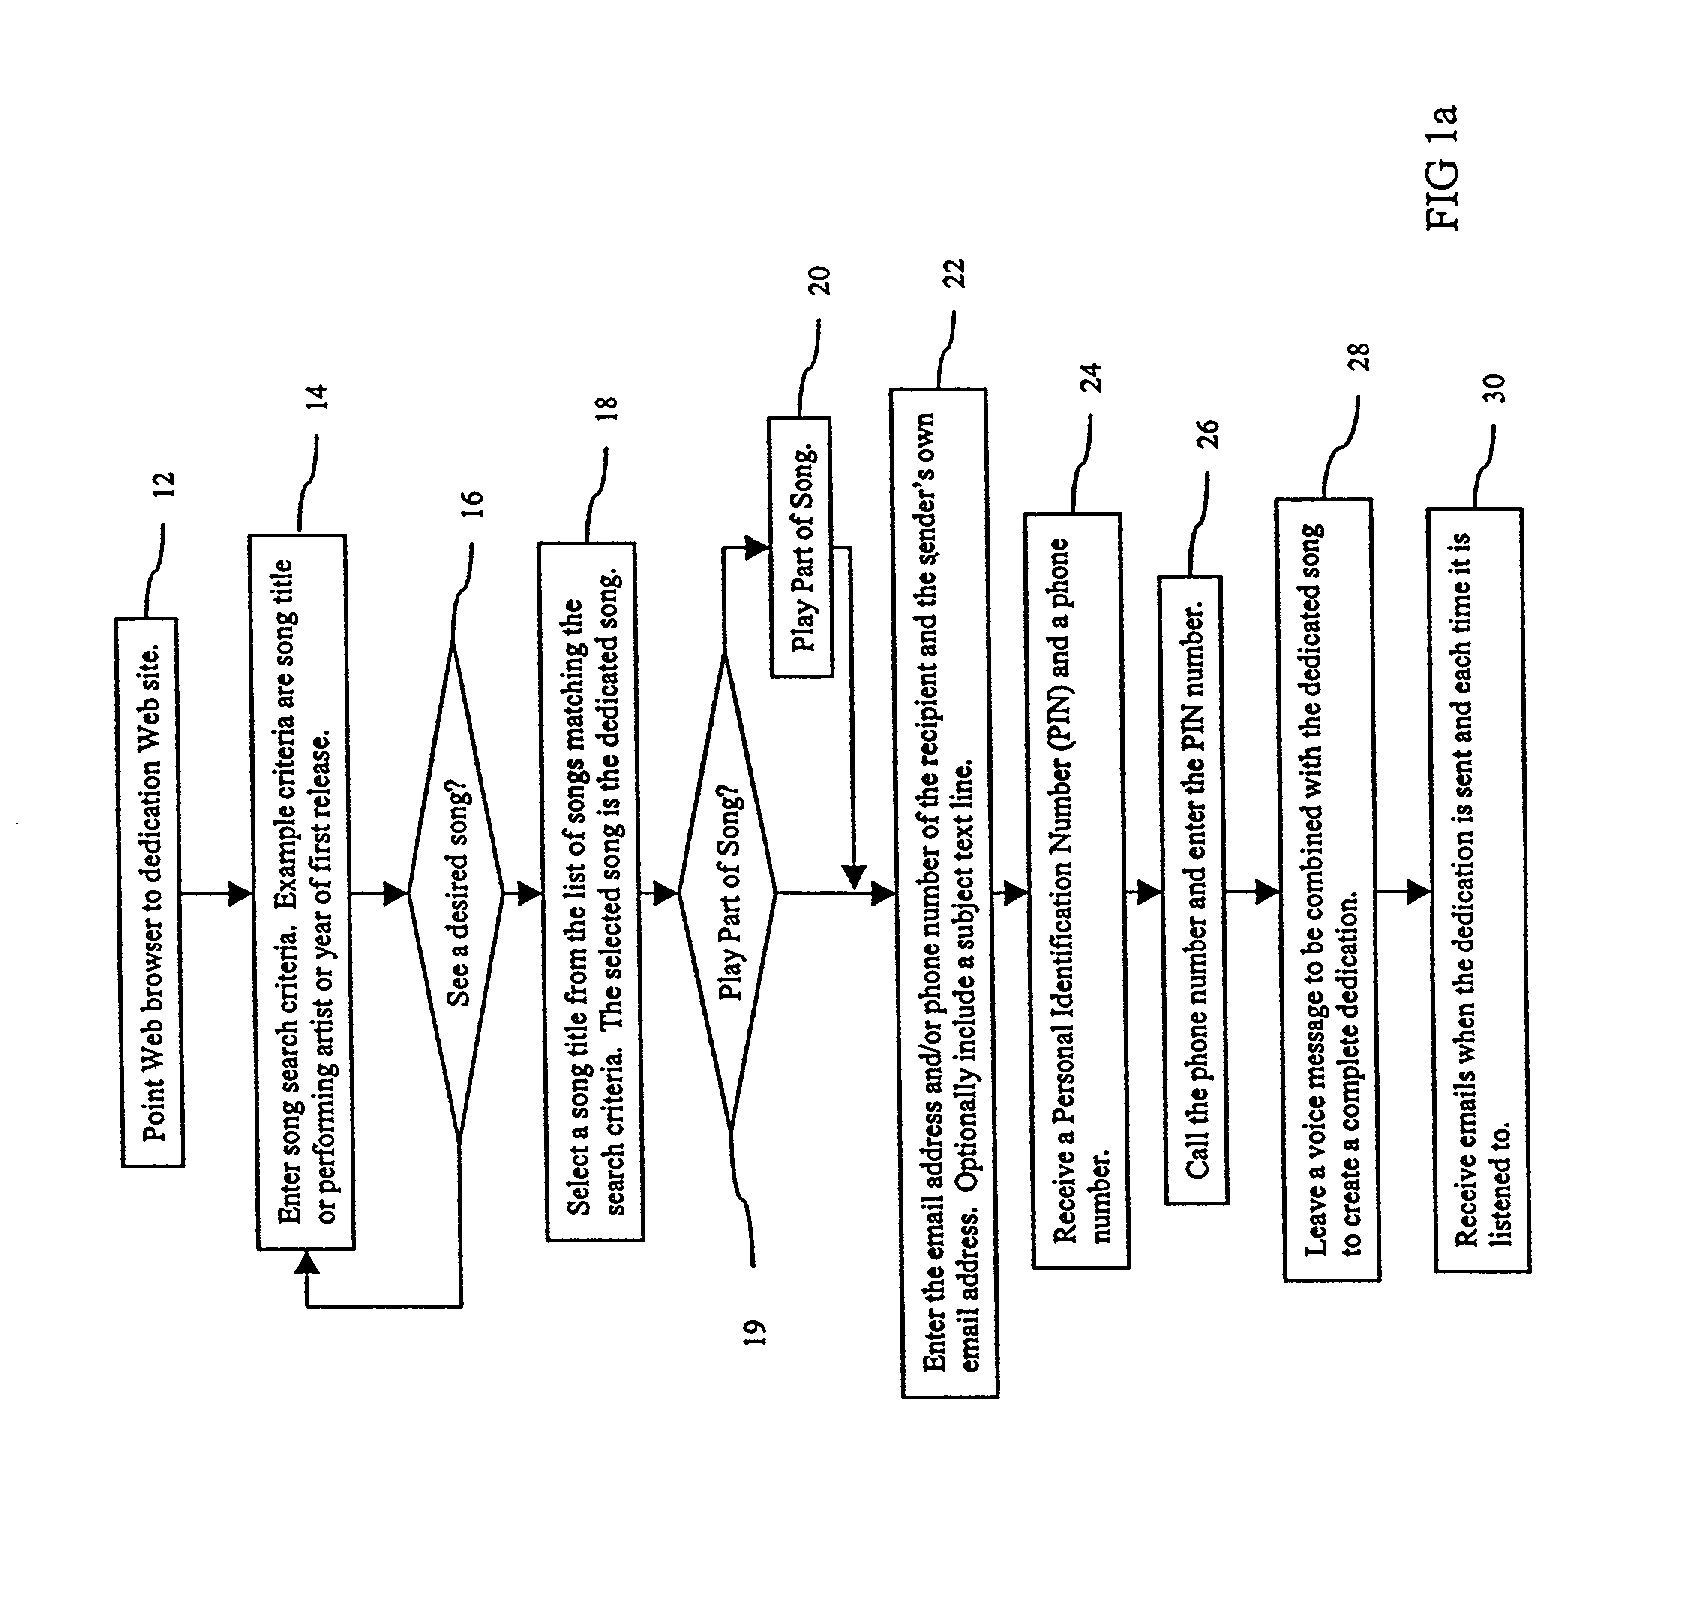 Method and system for electronic song dedication